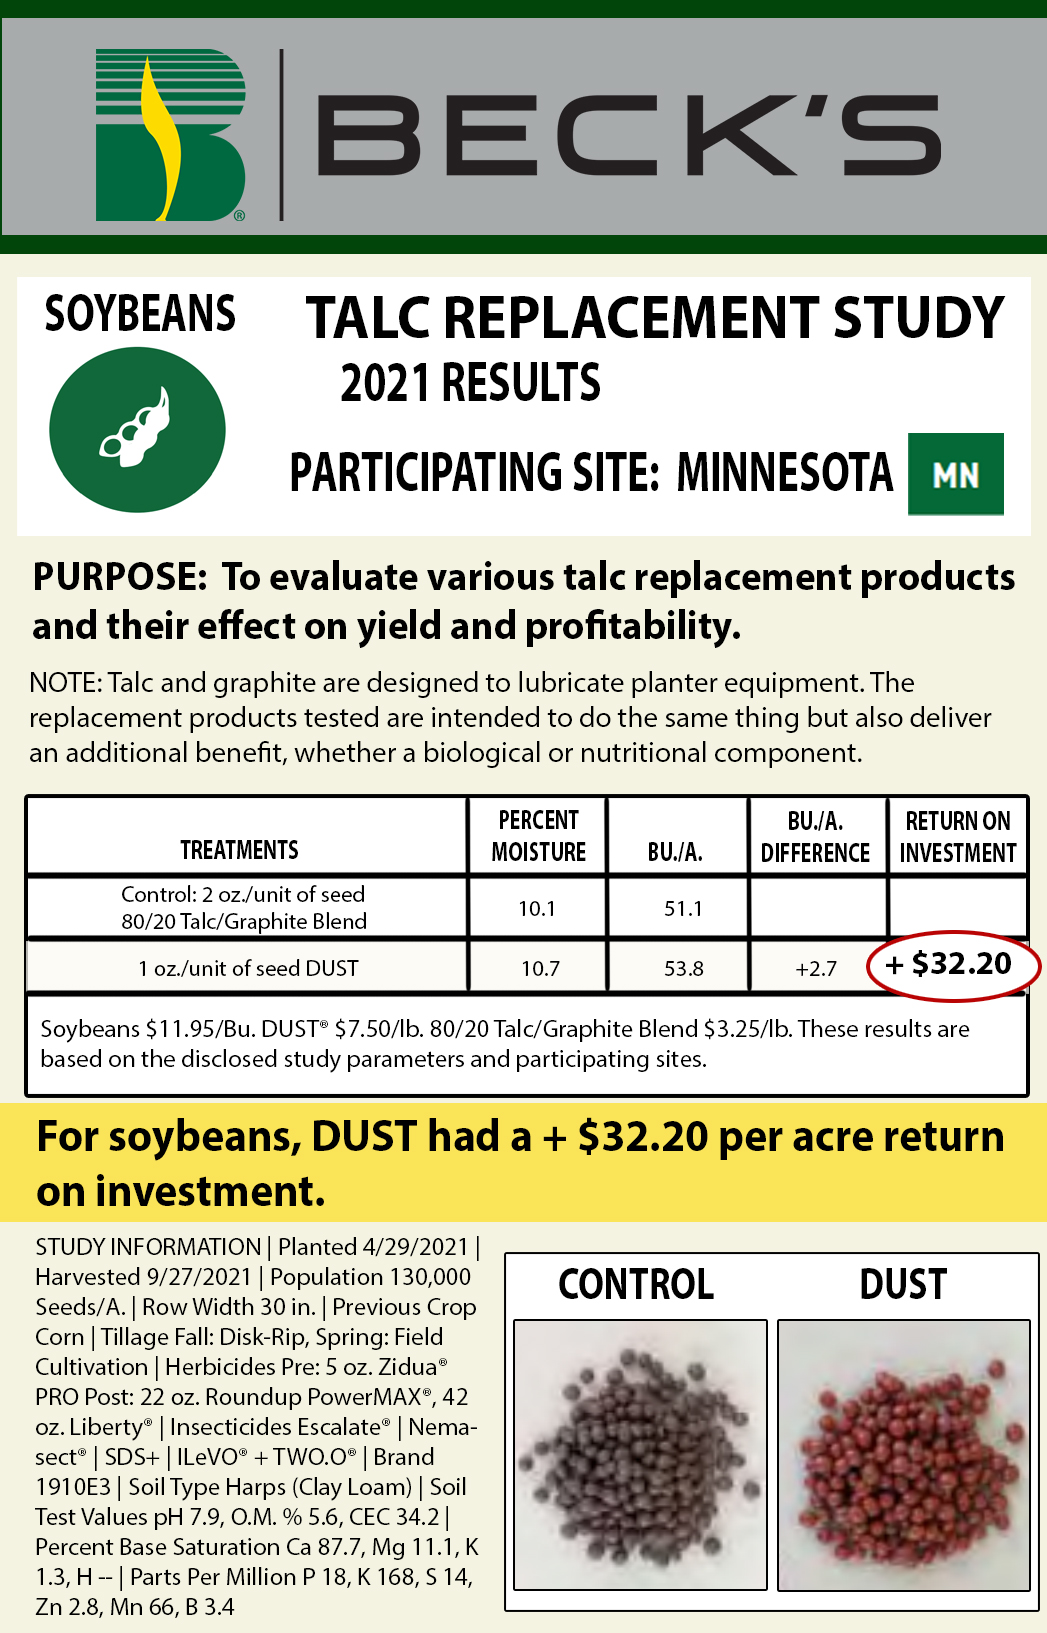 Becks Research on DUST Seed and Mechanical Lubricant - talc replacement